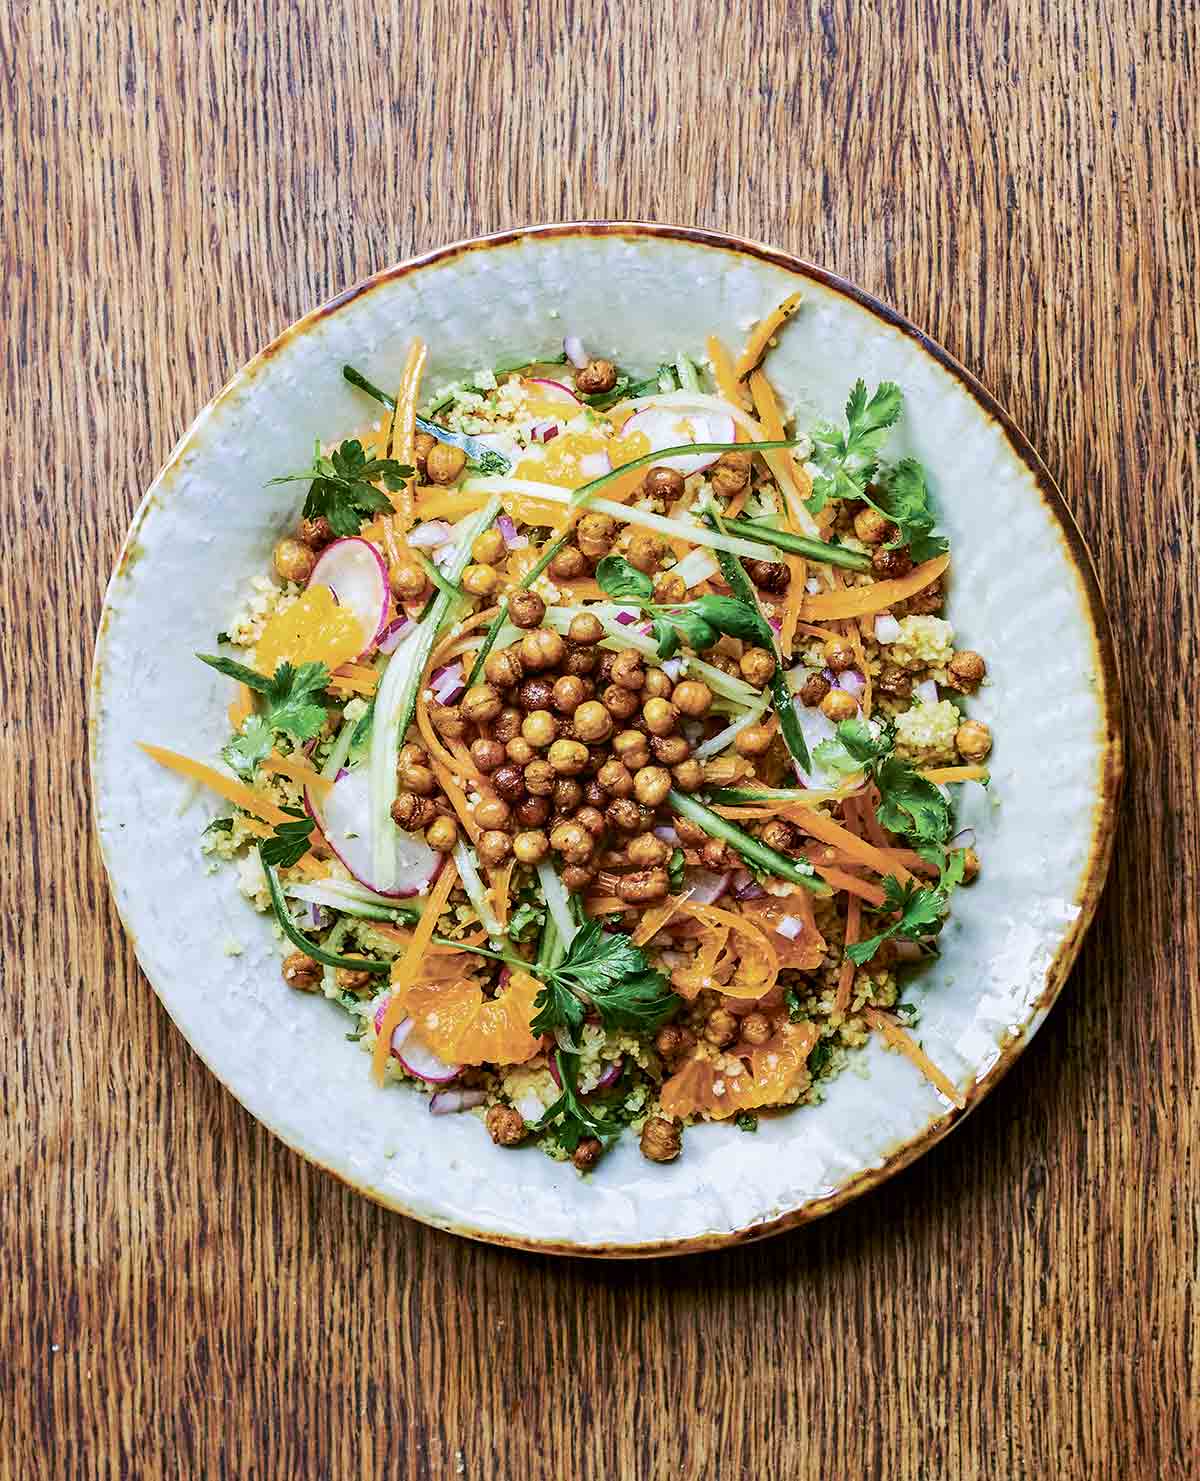 A gold-rimmed white plate topped with chickpea salad, orange segments, couscous, cilantro, and shaved carrot.